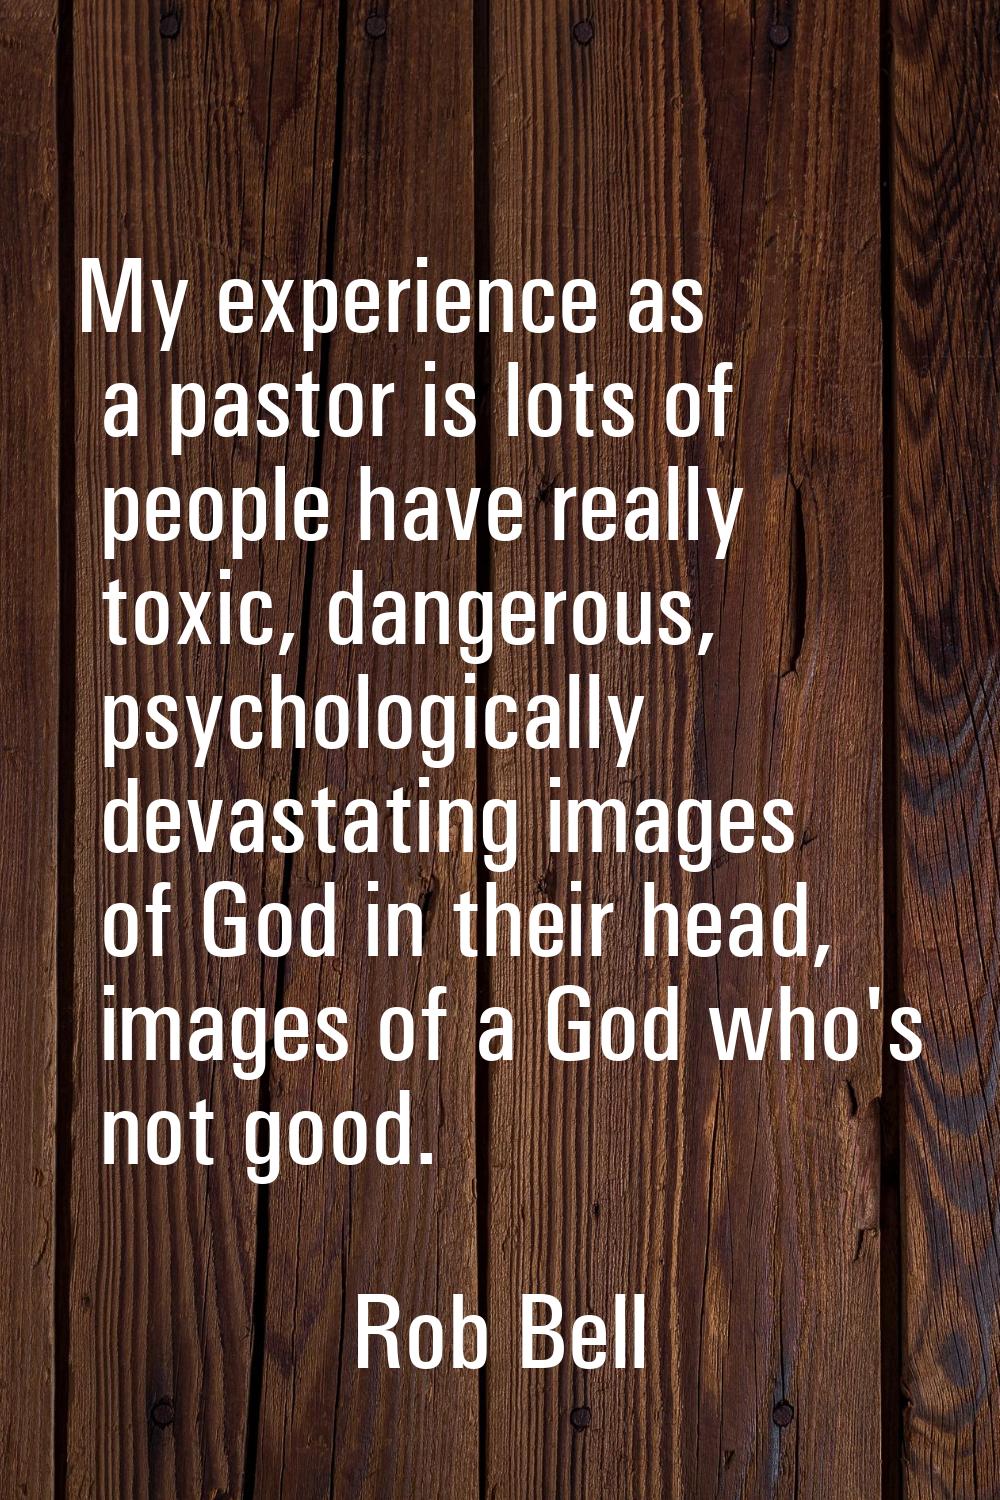 My experience as a pastor is lots of people have really toxic, dangerous, psychologically devastati